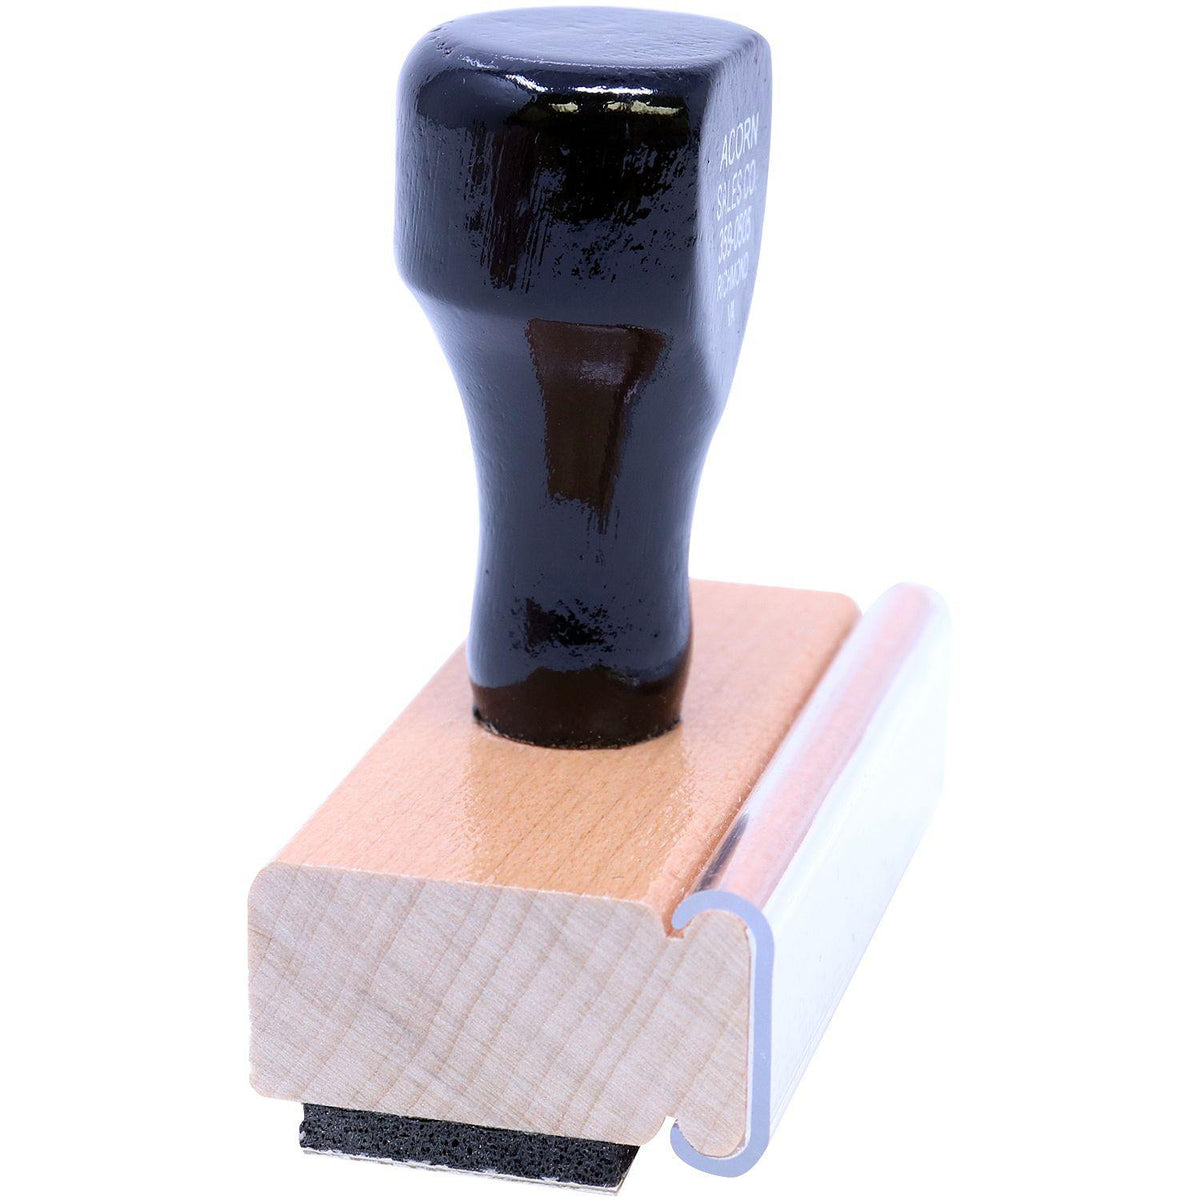 Side View of Large Fantastic Rubber Stamp at an Angle